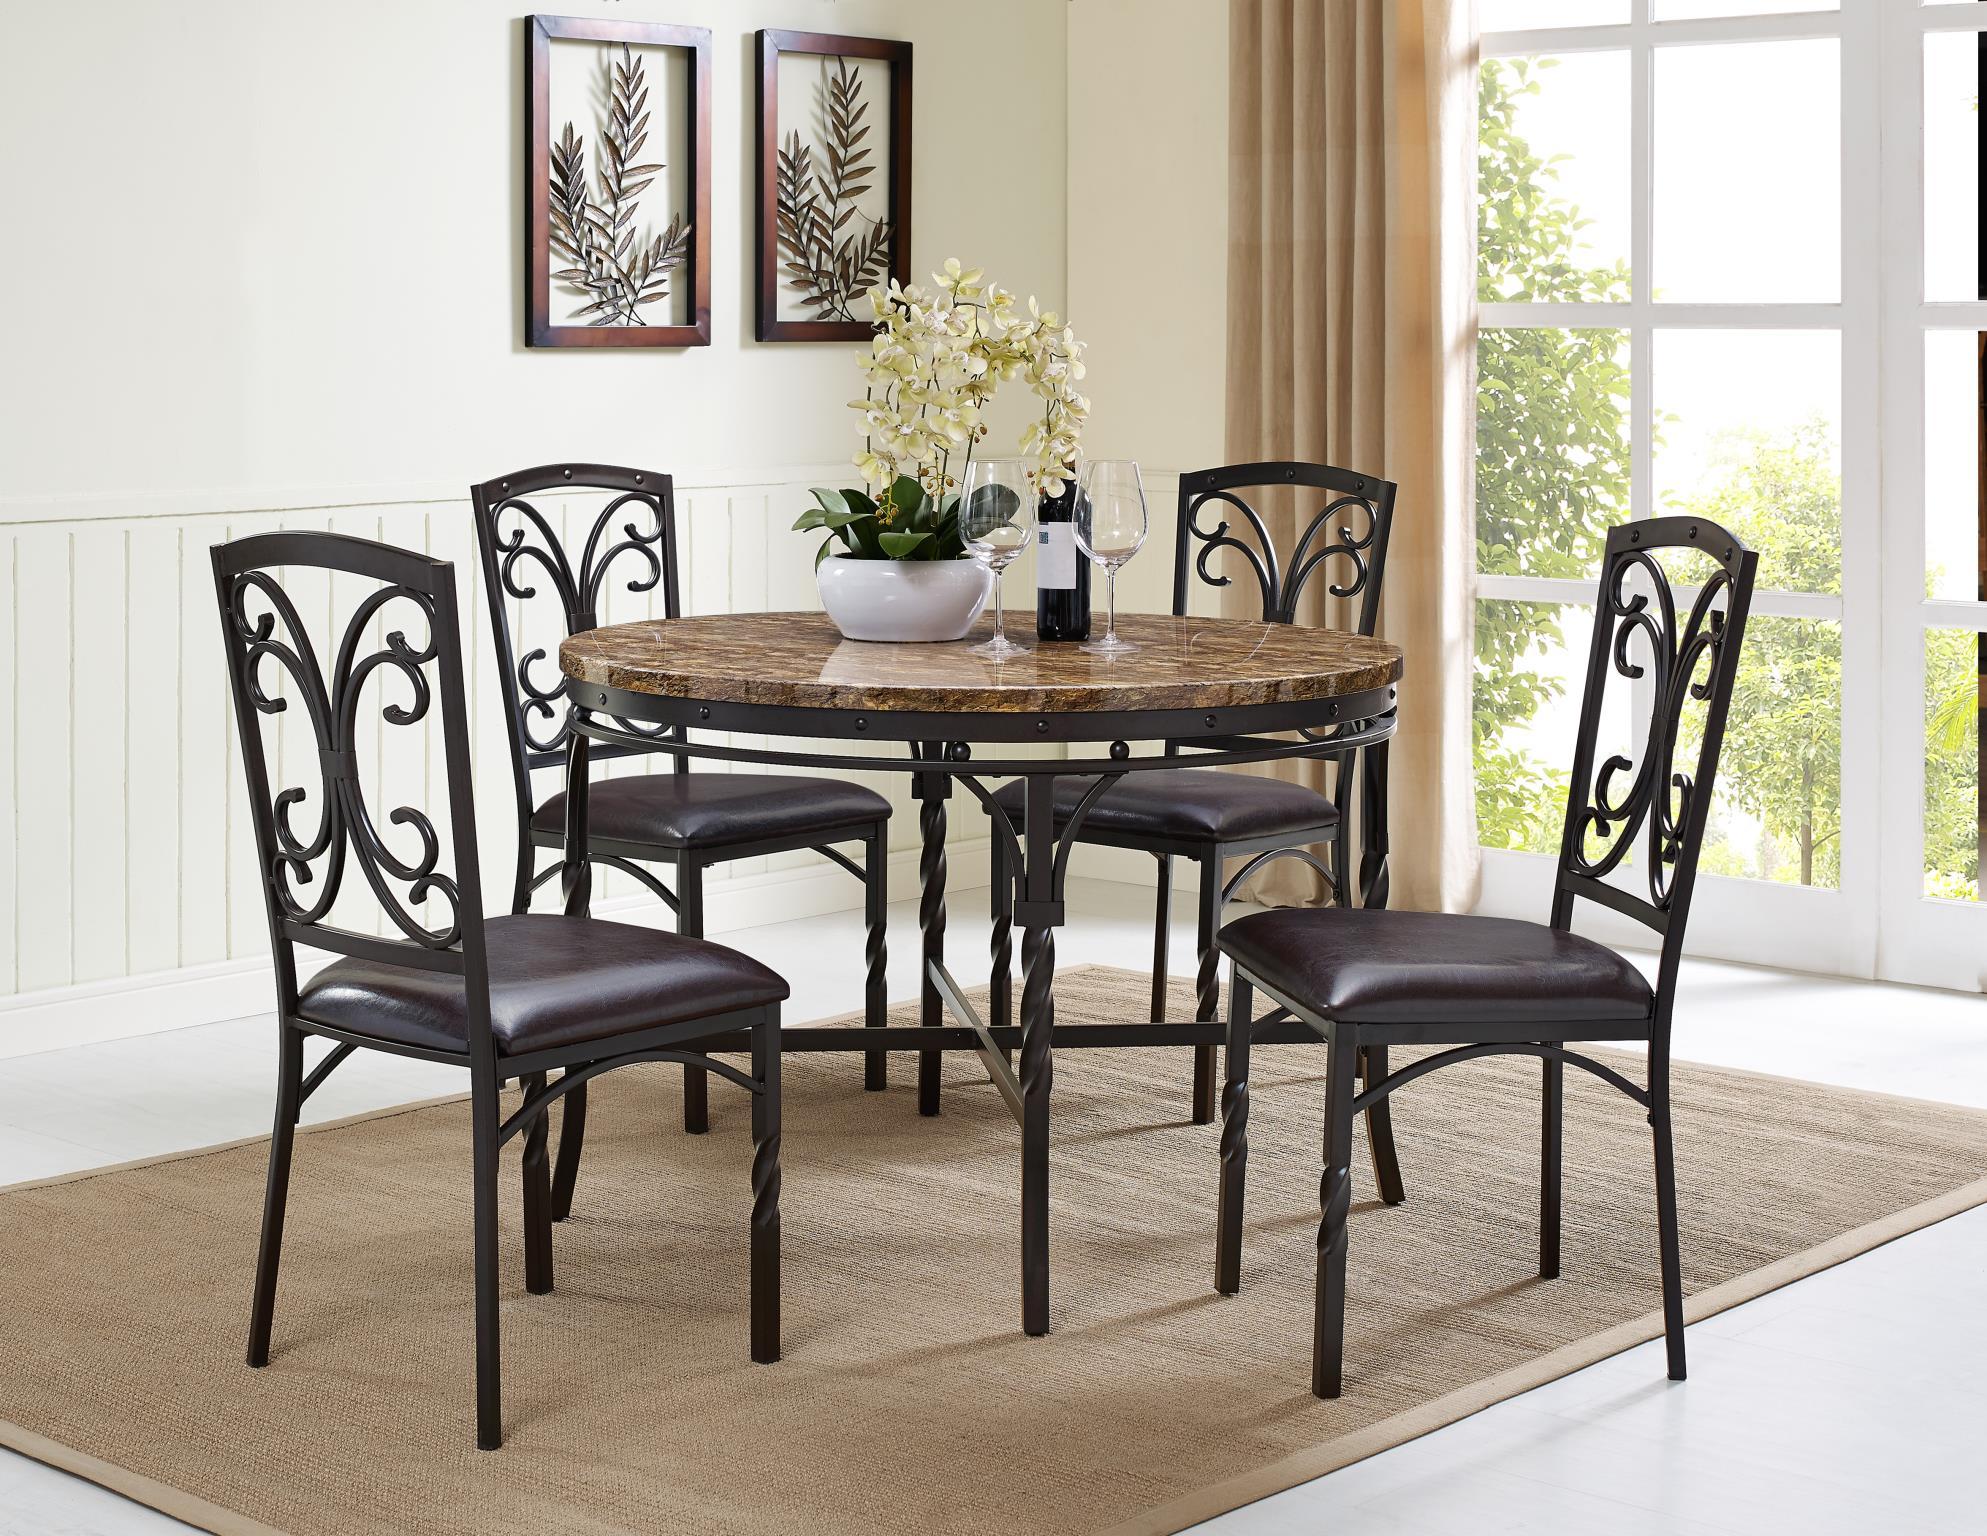 Contemporary, Casual Dining Table Set TUSCAN 4550-Set 4550-Set-5Pcs in Brown, Black Faux Leather